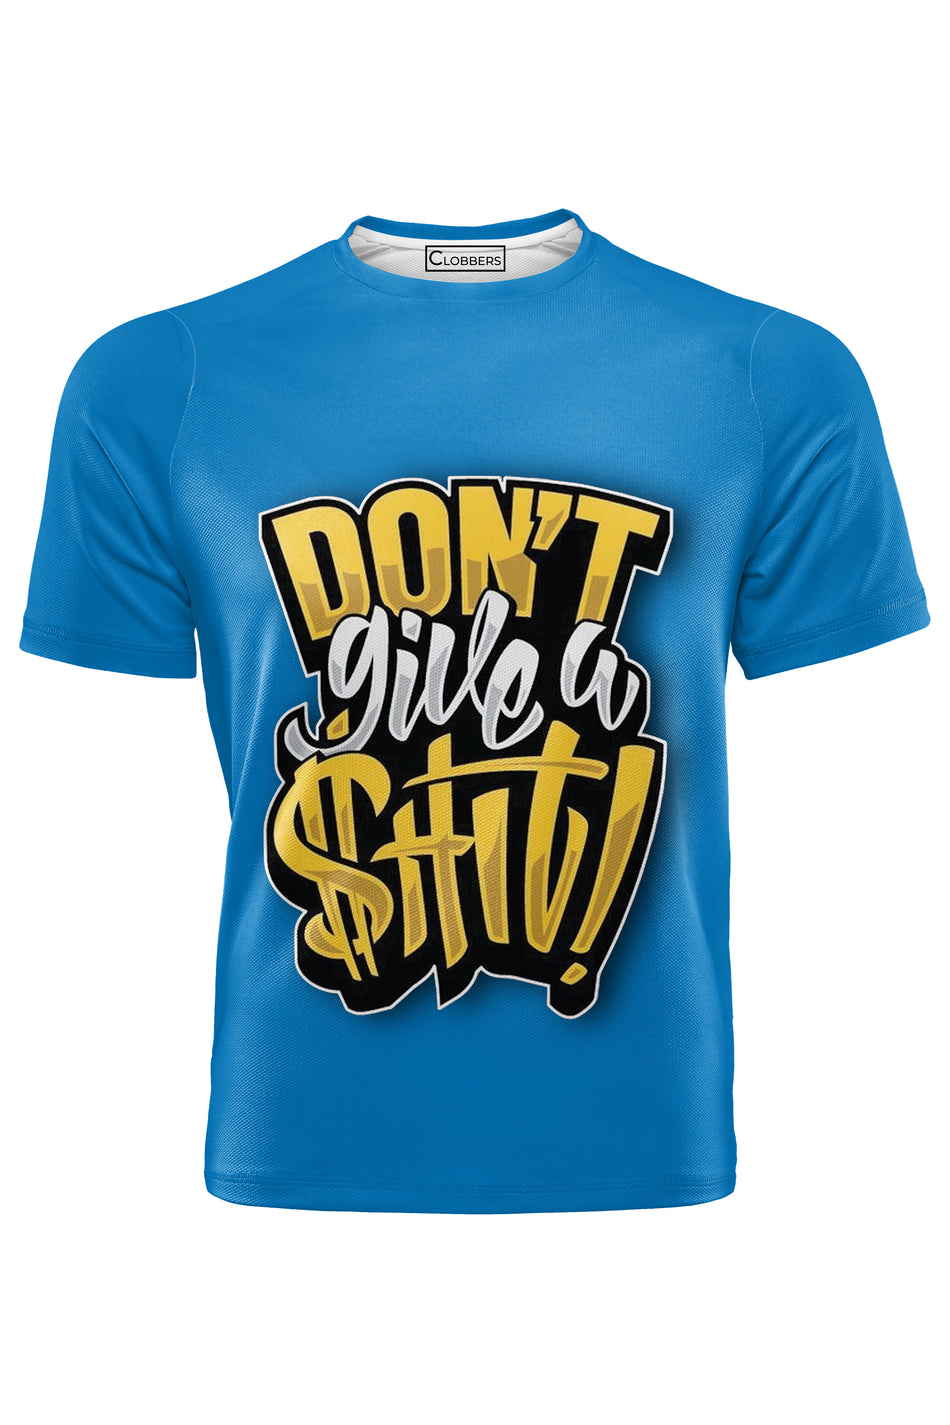 AOUT - DONT GIVE A TSHIRT